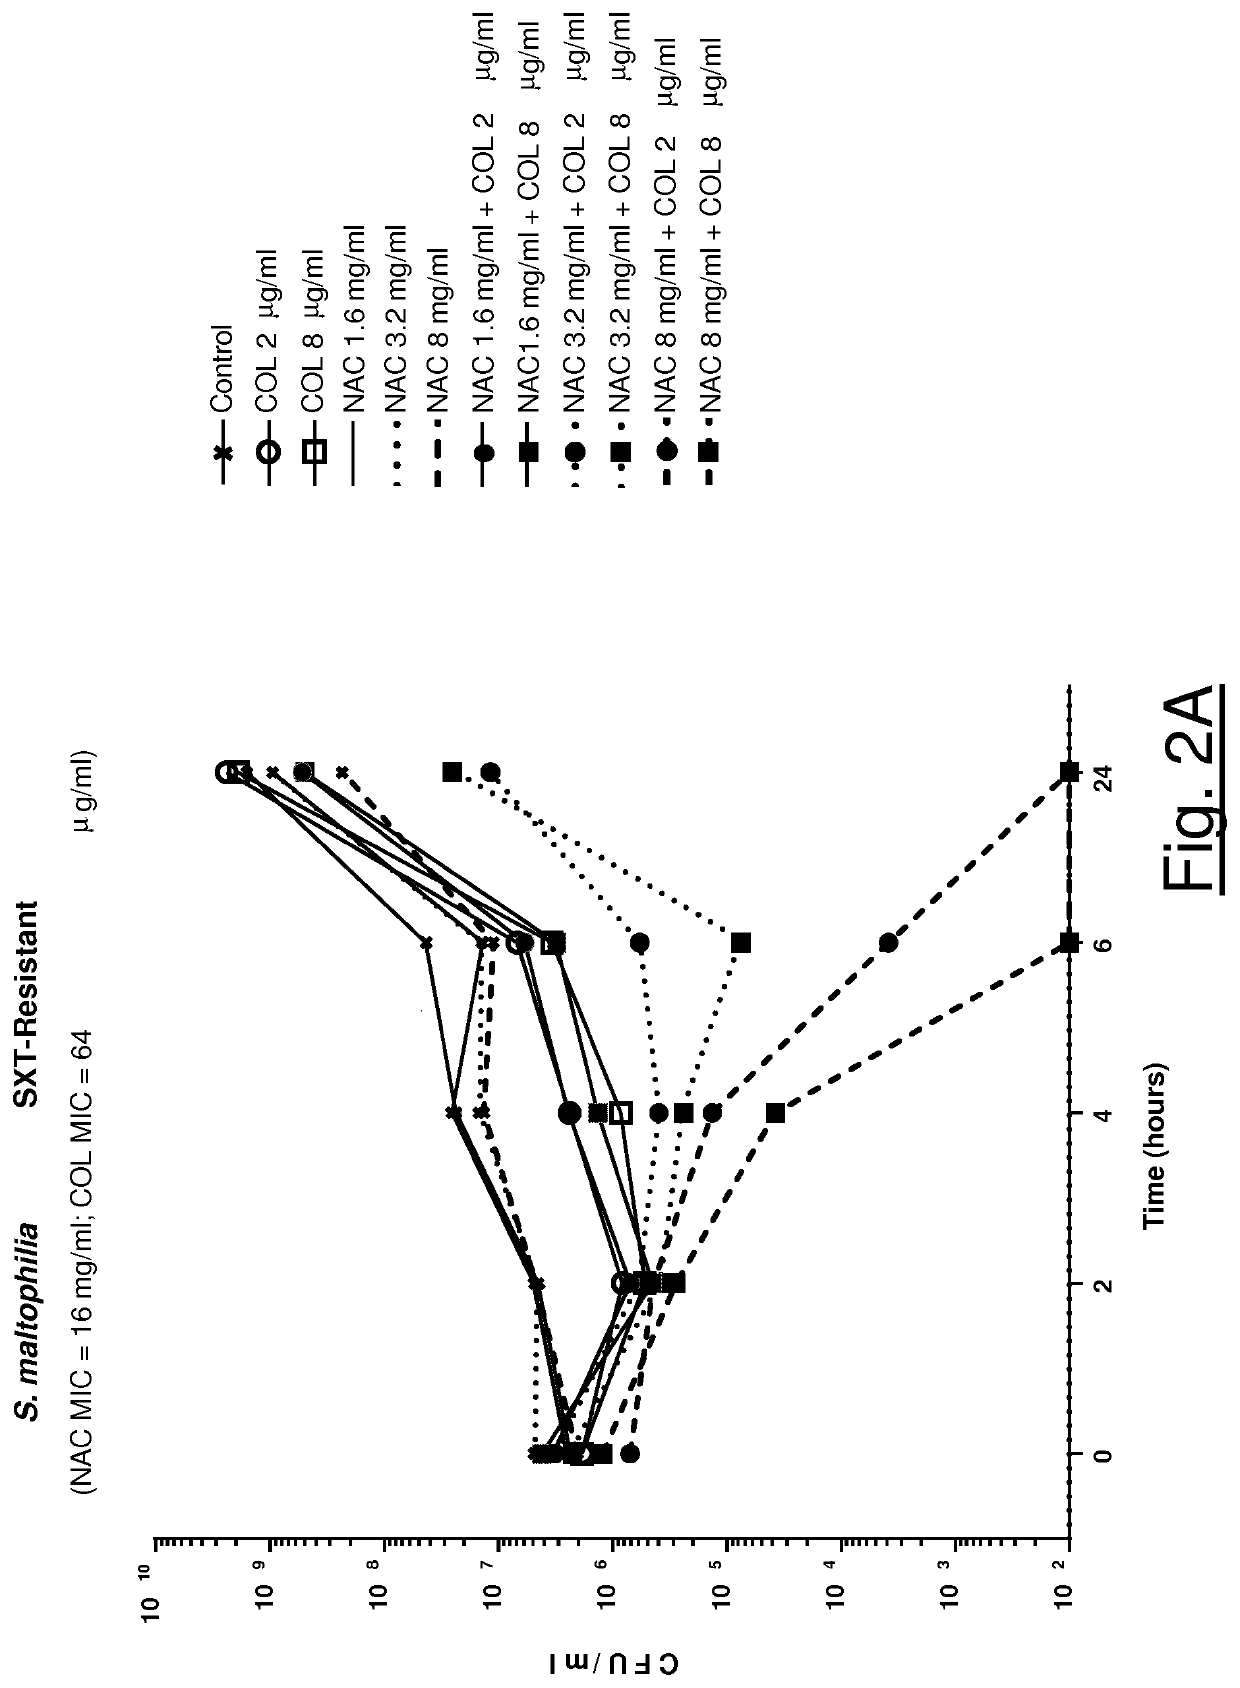 Association of n-acetylcysteine and colistin for use in bacterial infections